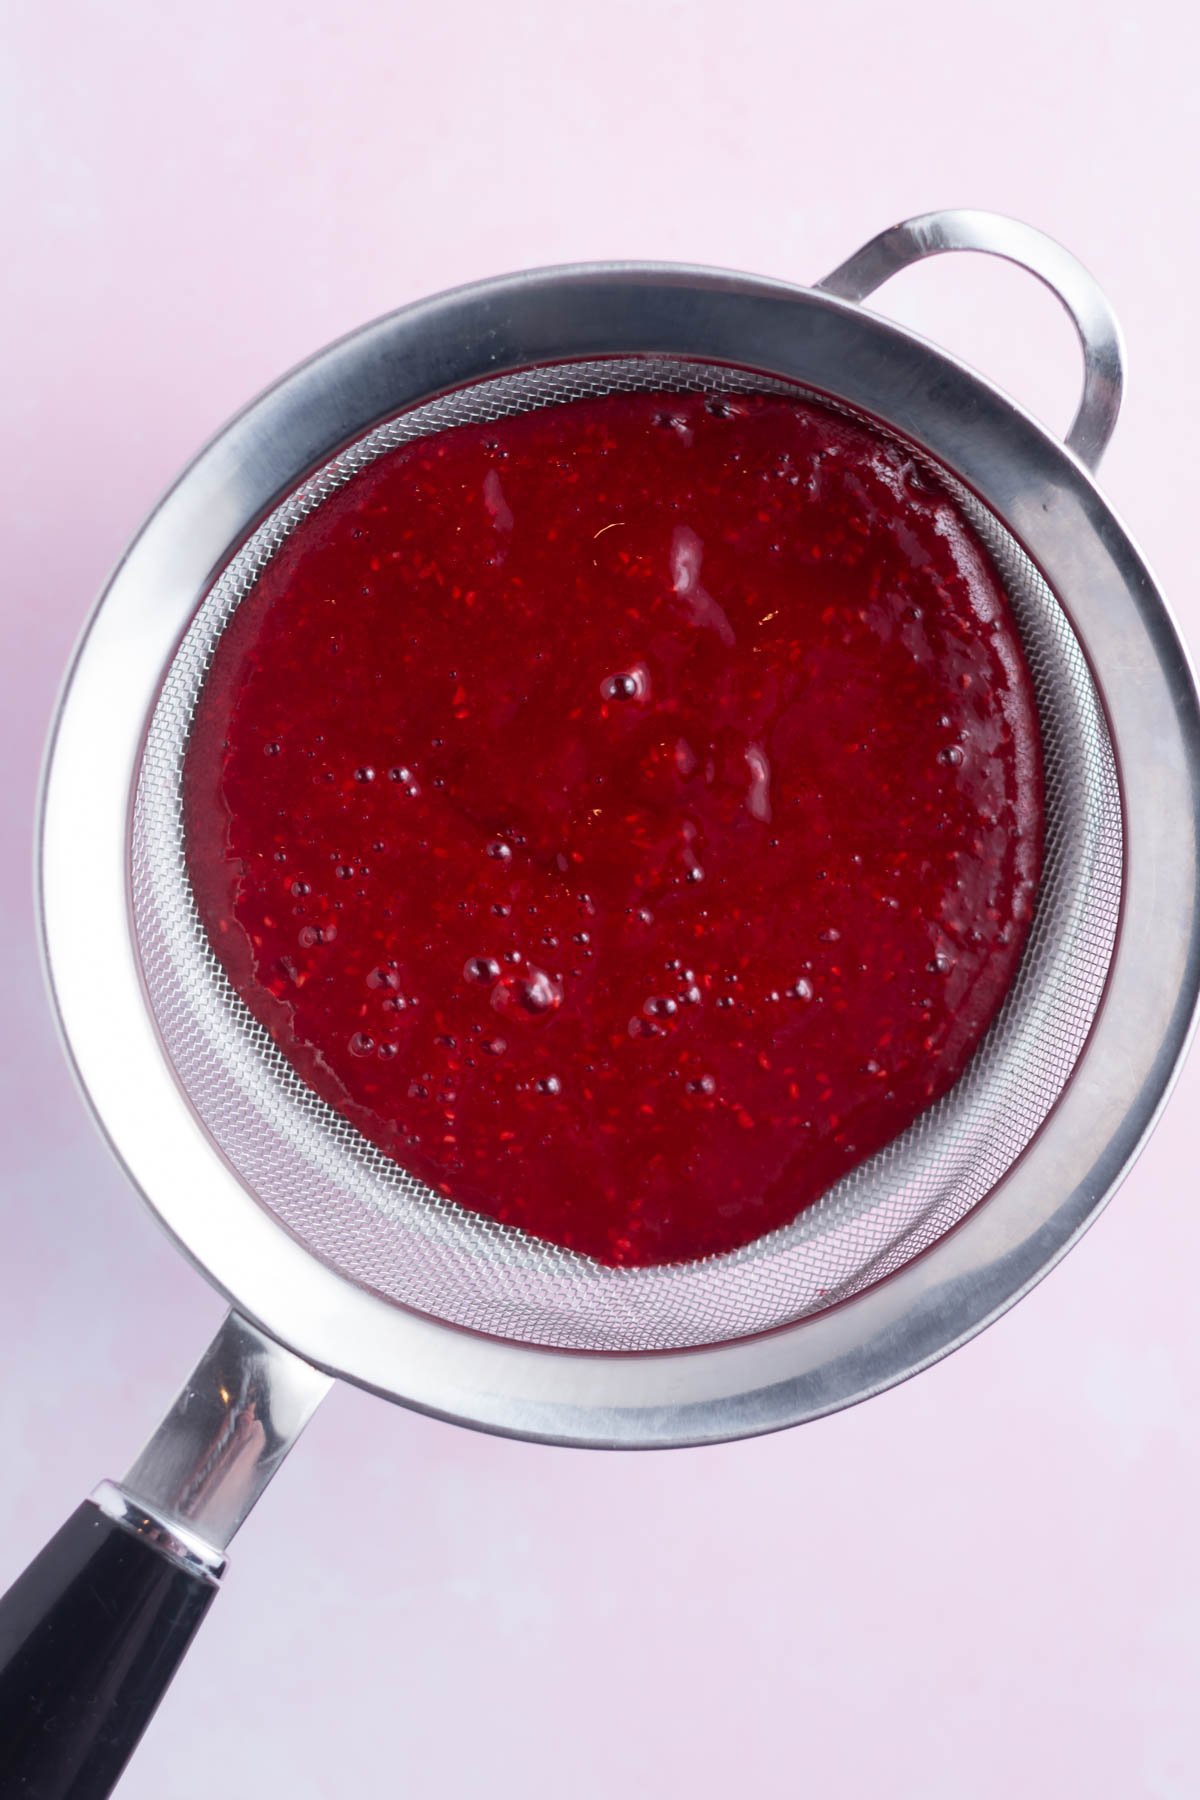 raspberry puree being pushed through a sieve